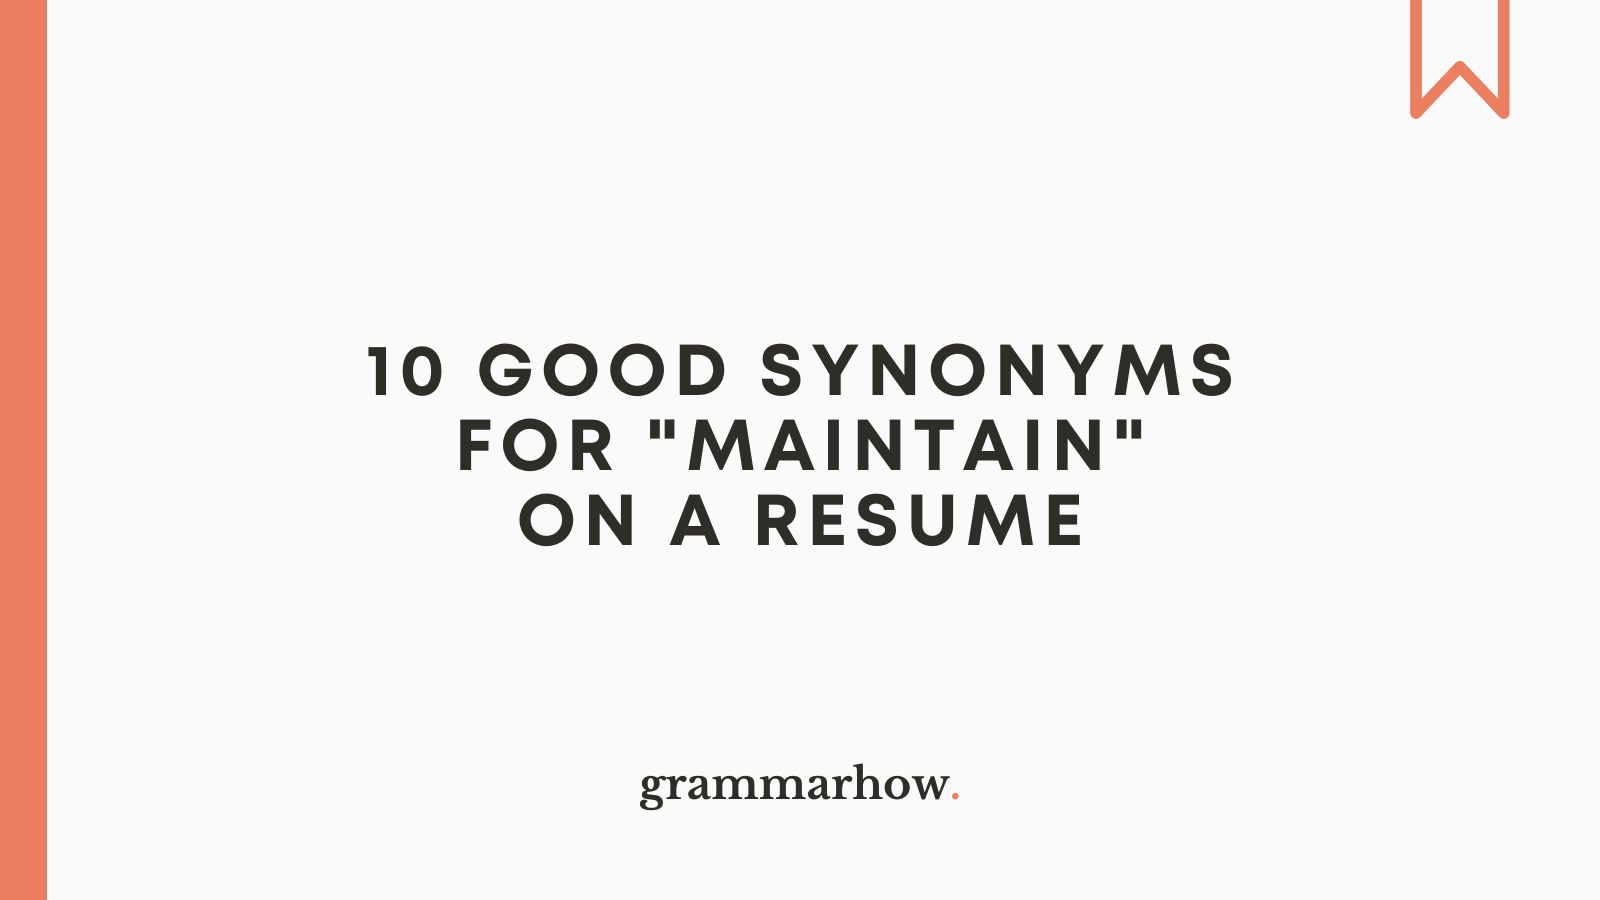 supported synonym in resume